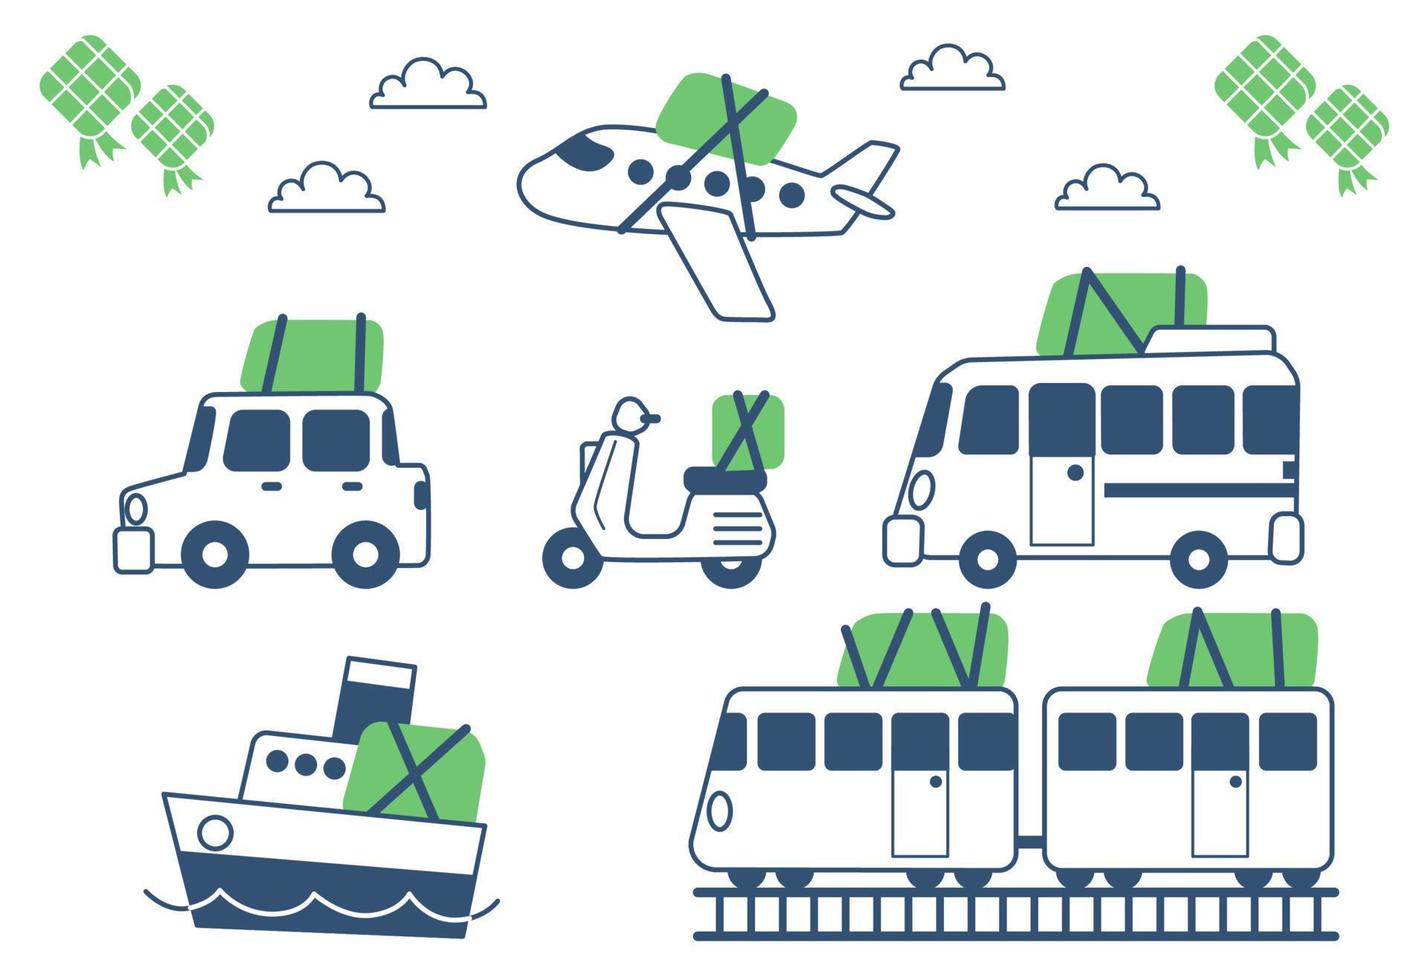 the transportation that is usually used when going home for Eid is transporting goods vector